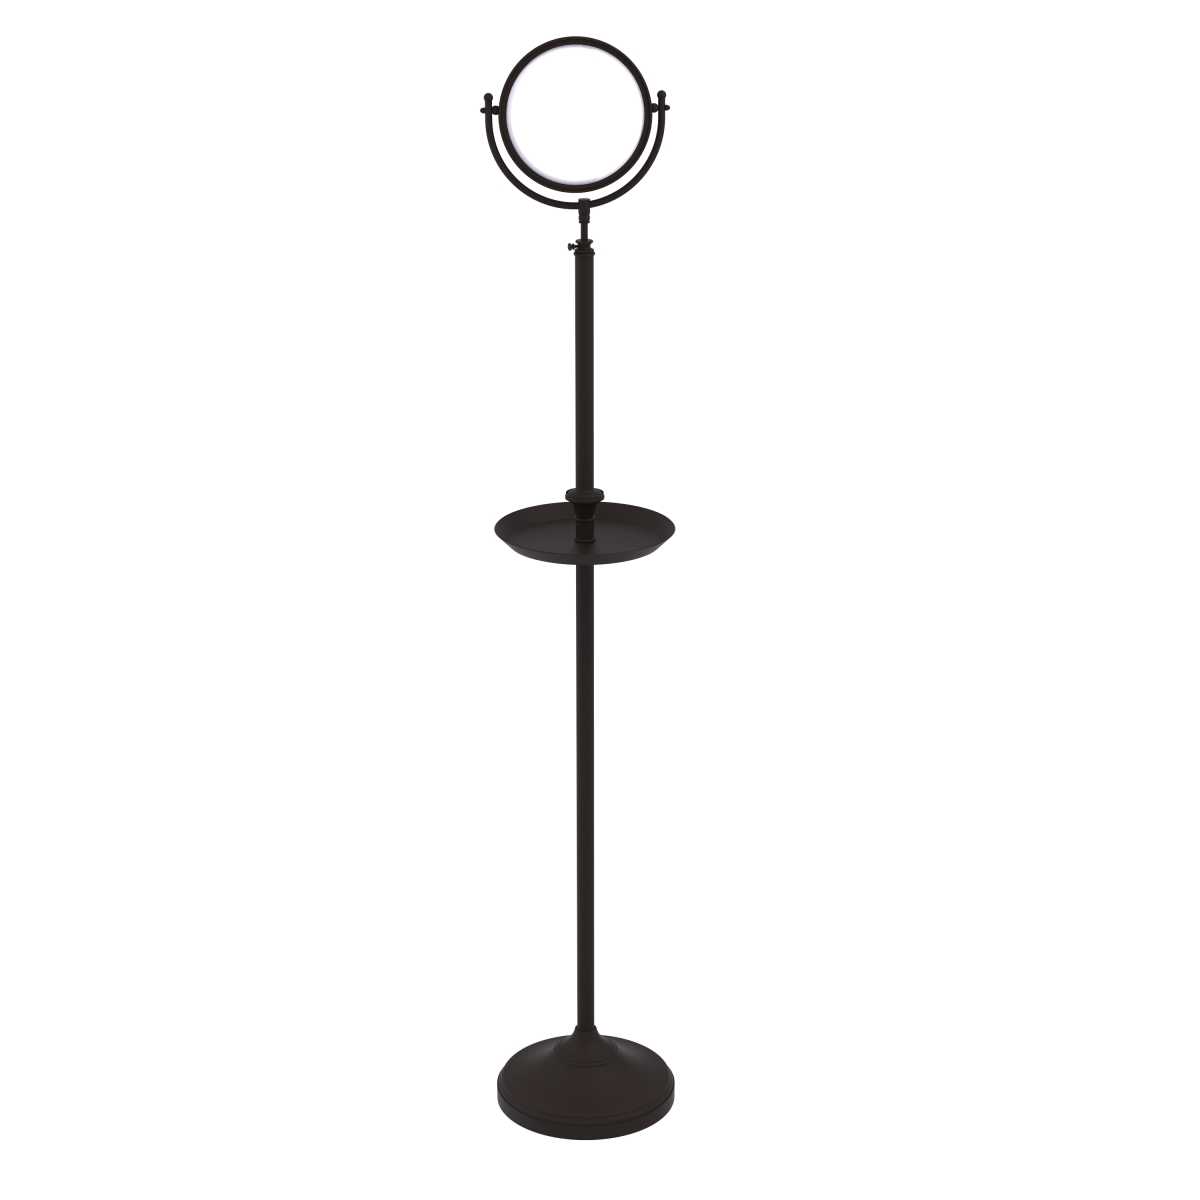 Allied Brass DMF-3-3X-ORB Floor Standing Make-Up Mirror 8 in. dia. with 3X Magnification & Shaving Tray, Oil Rubbed Bronze